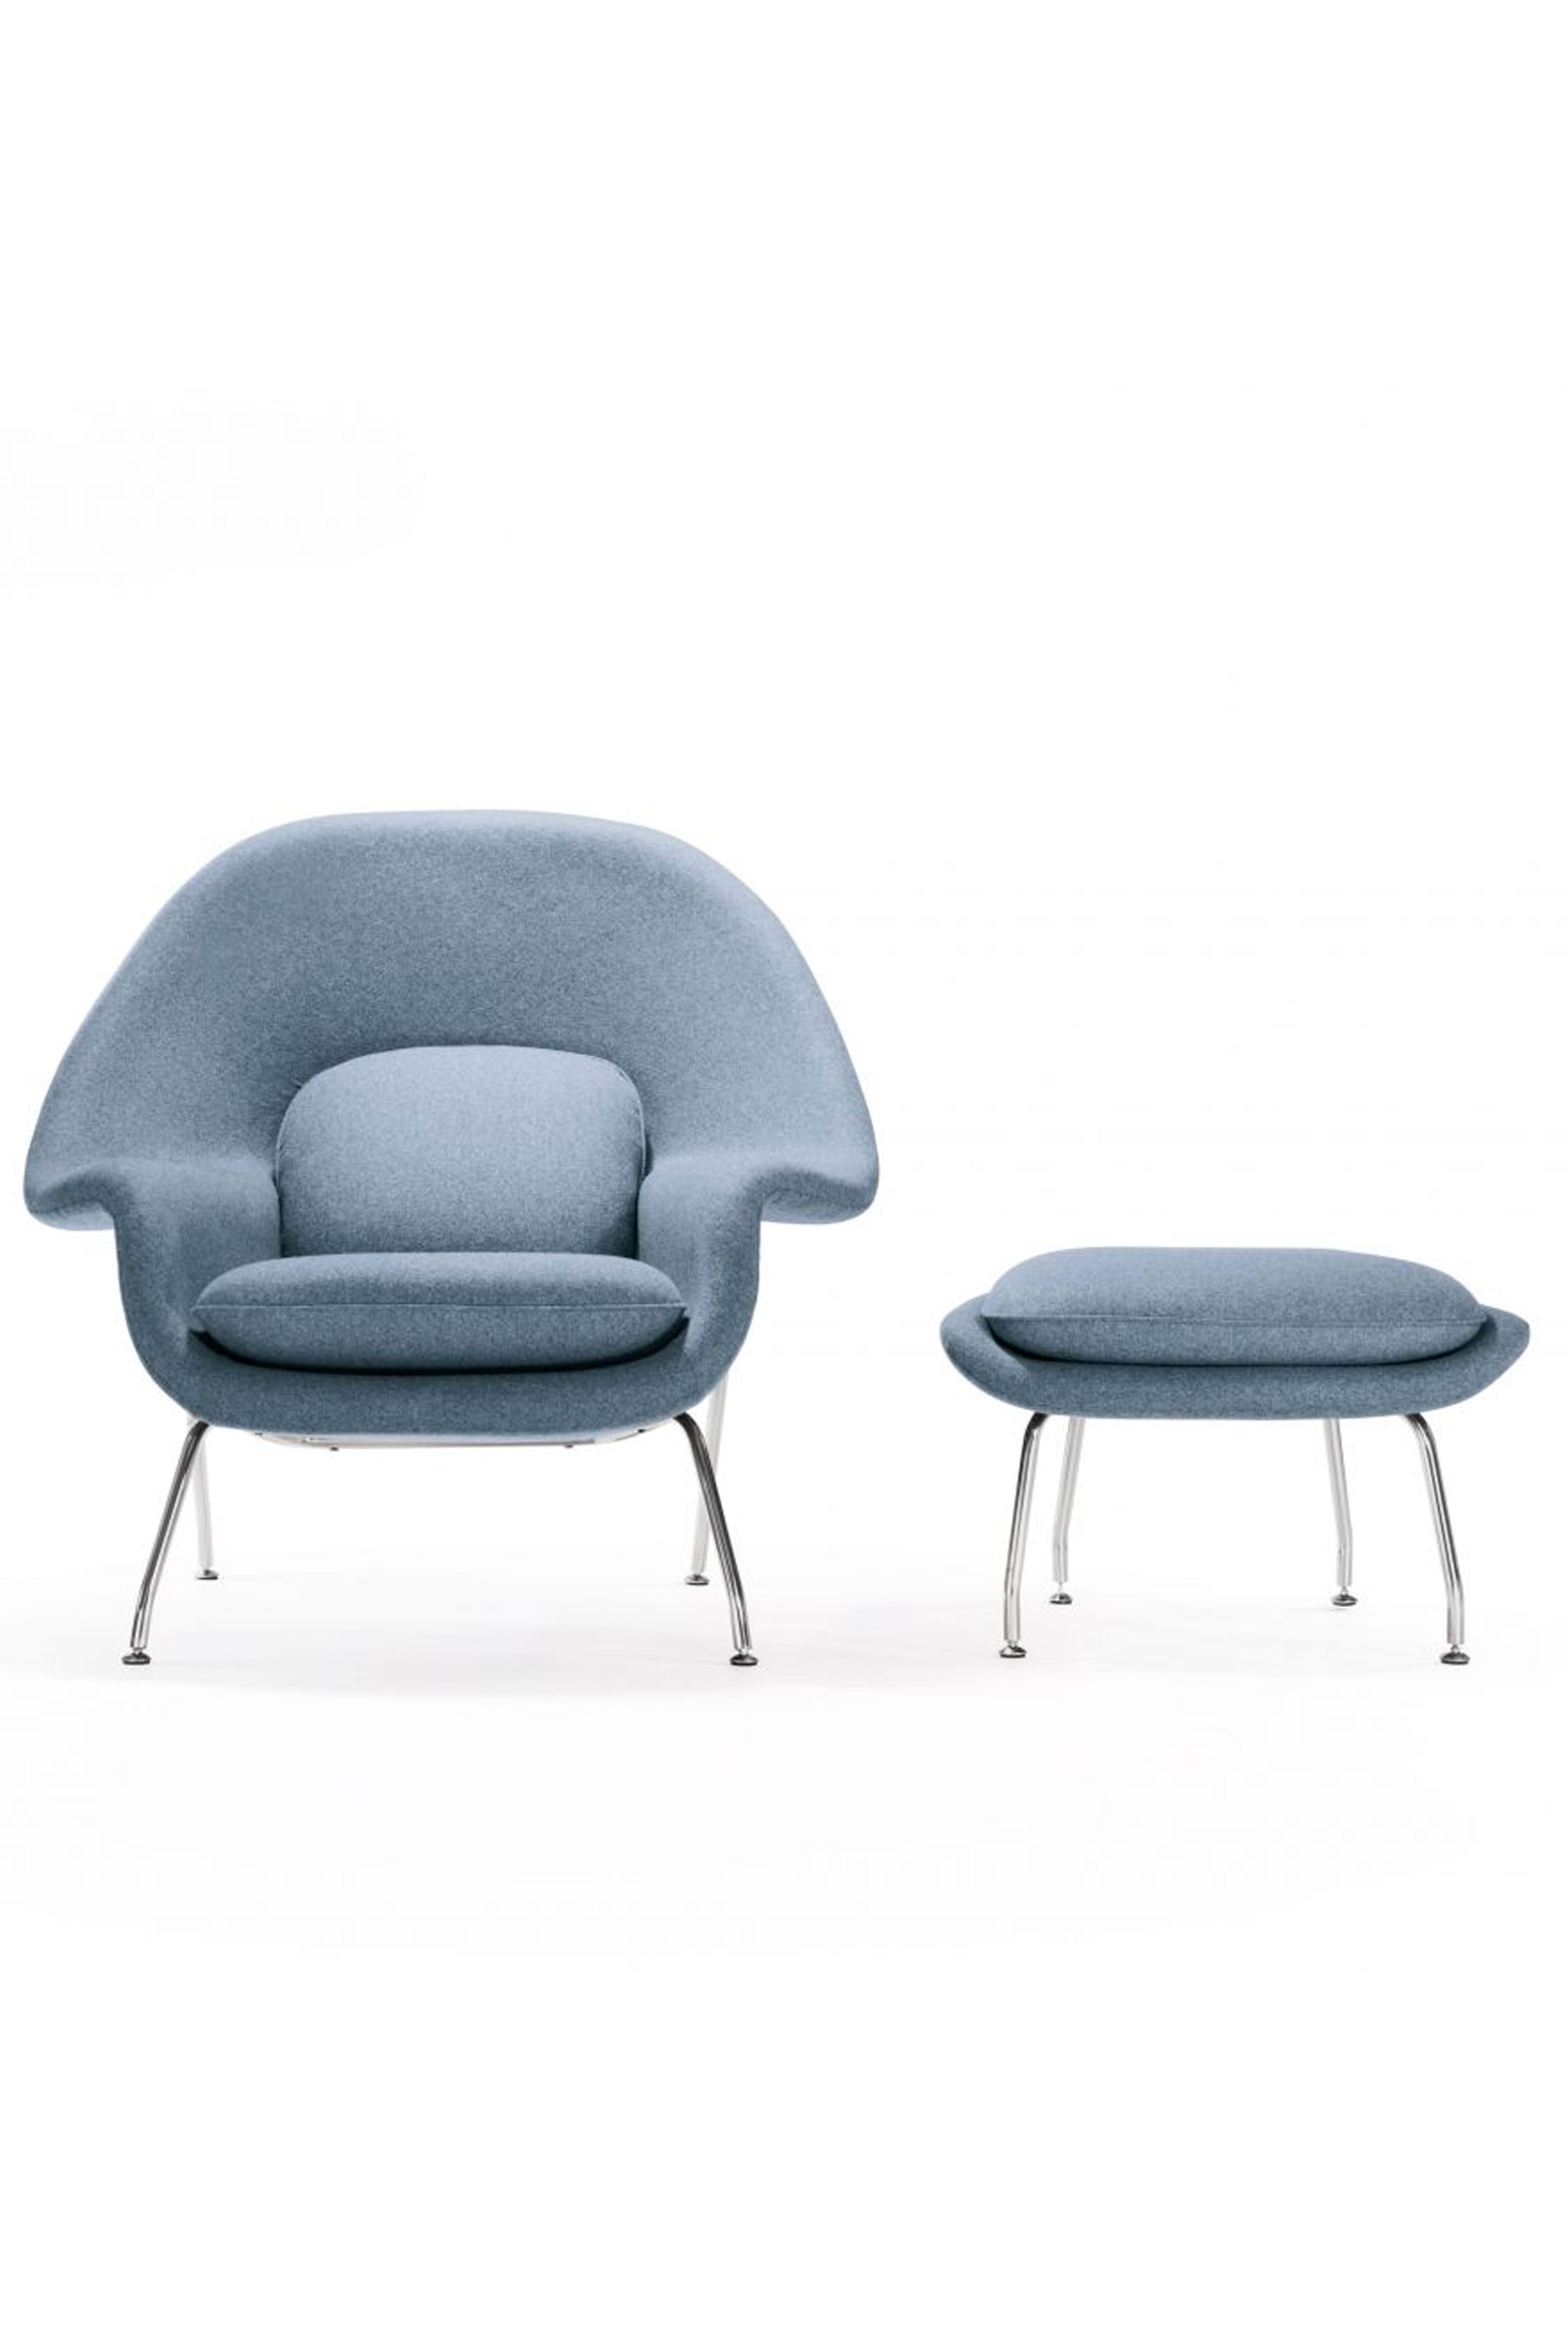 Best armchairs for your home: From leather to velvet   The Independent